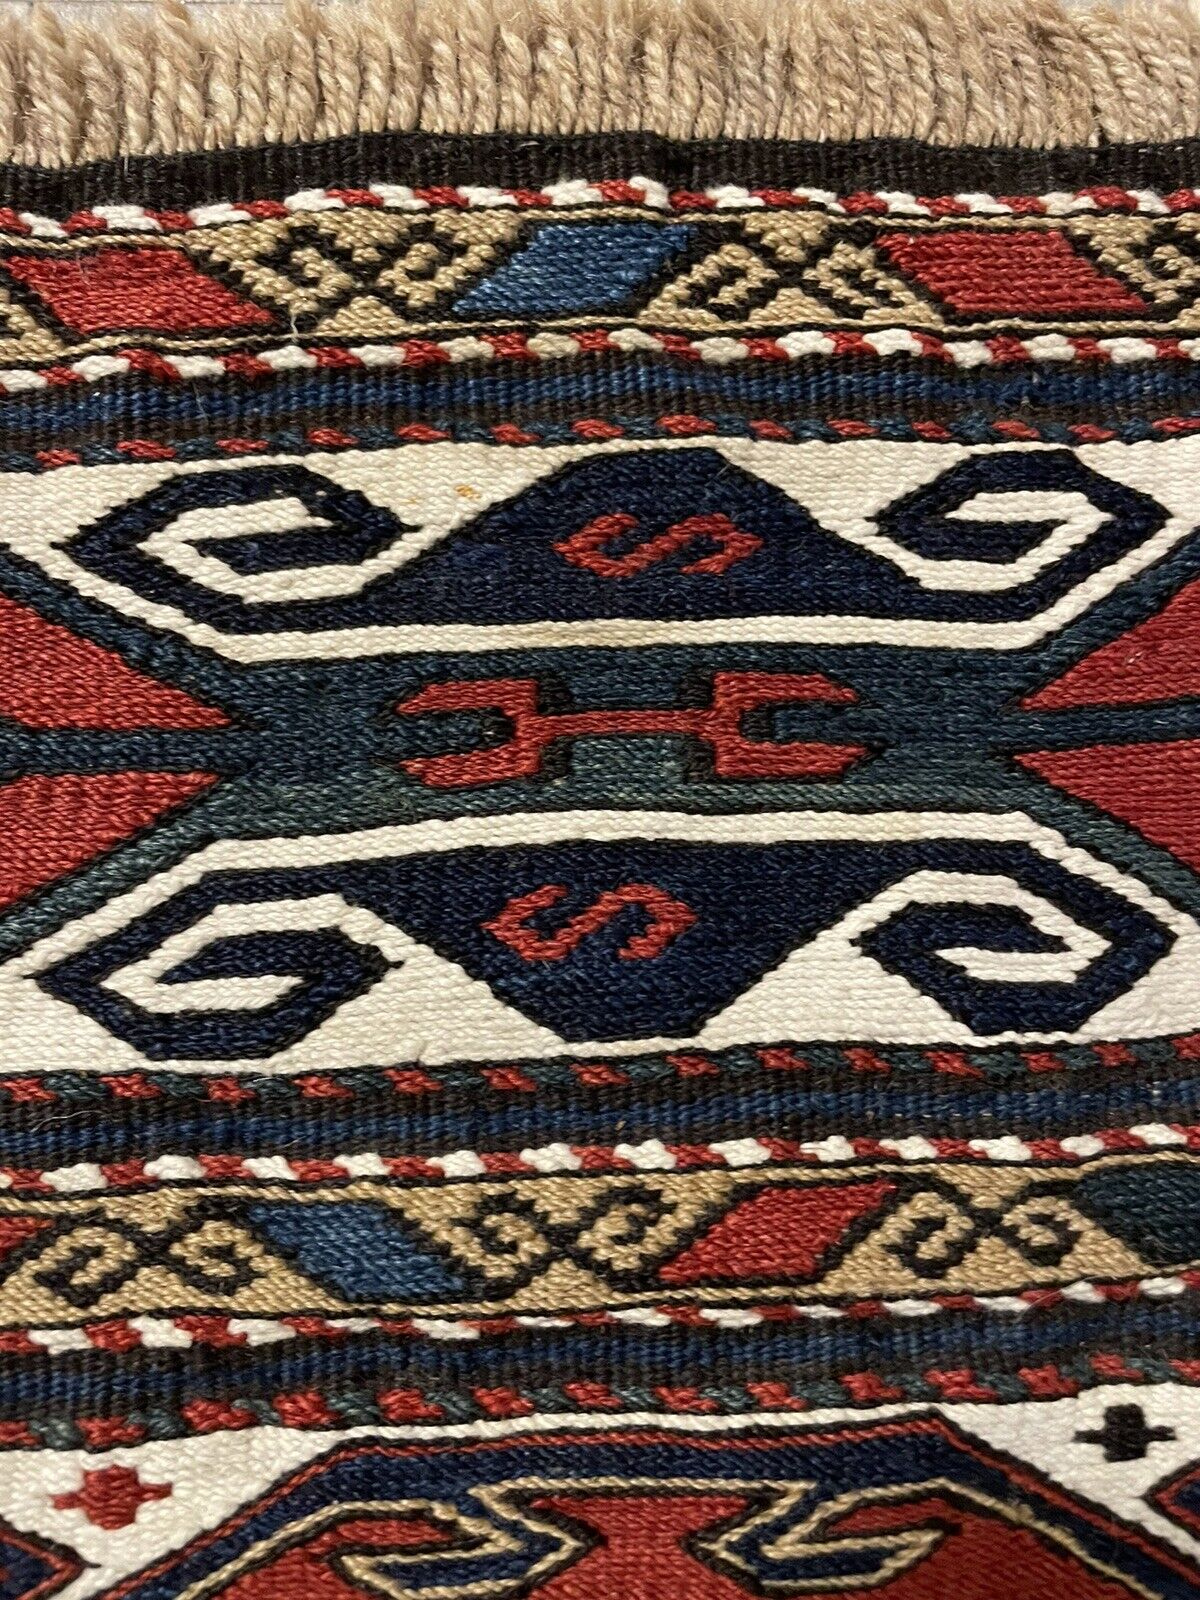 Close-up of durability on Handmade Antique Persian Sumak Collectible Kilim - Detailed view emphasizing the durability of the kilim despite its age.